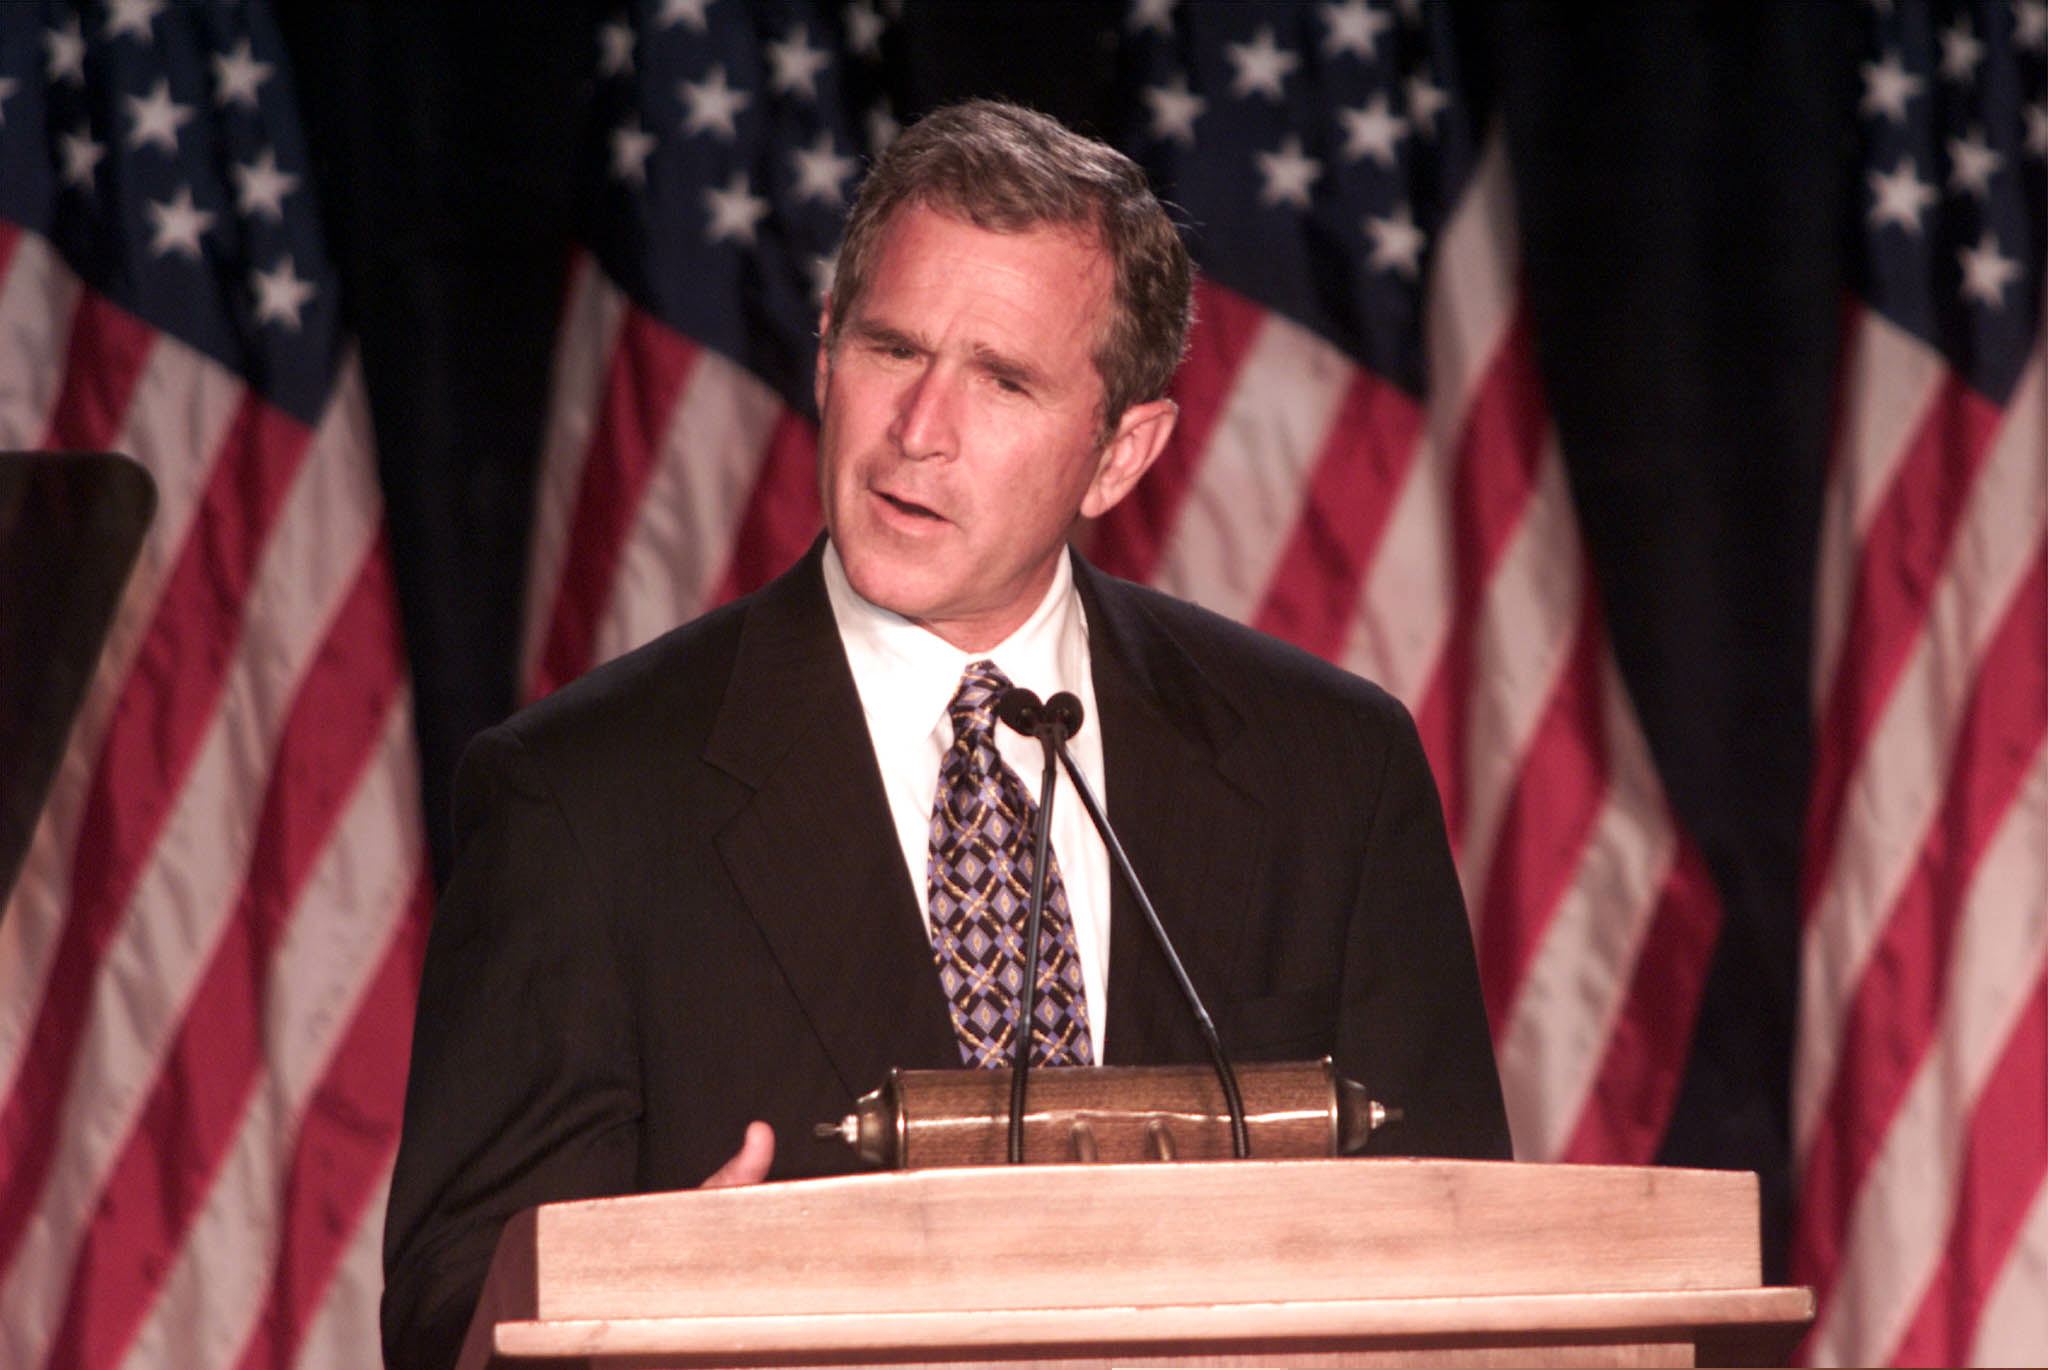 CHARLESTON, SC - SEPTEMBER 23: Texas Governor and presidential candidate George W. Bush delivers his address on the military to cadets and others at the General Mark Clark building at The Citadel in Georgetown, South Carolina on 23 September, 1999. (JOHN ALTHOUSE/AFP via Getty Images)